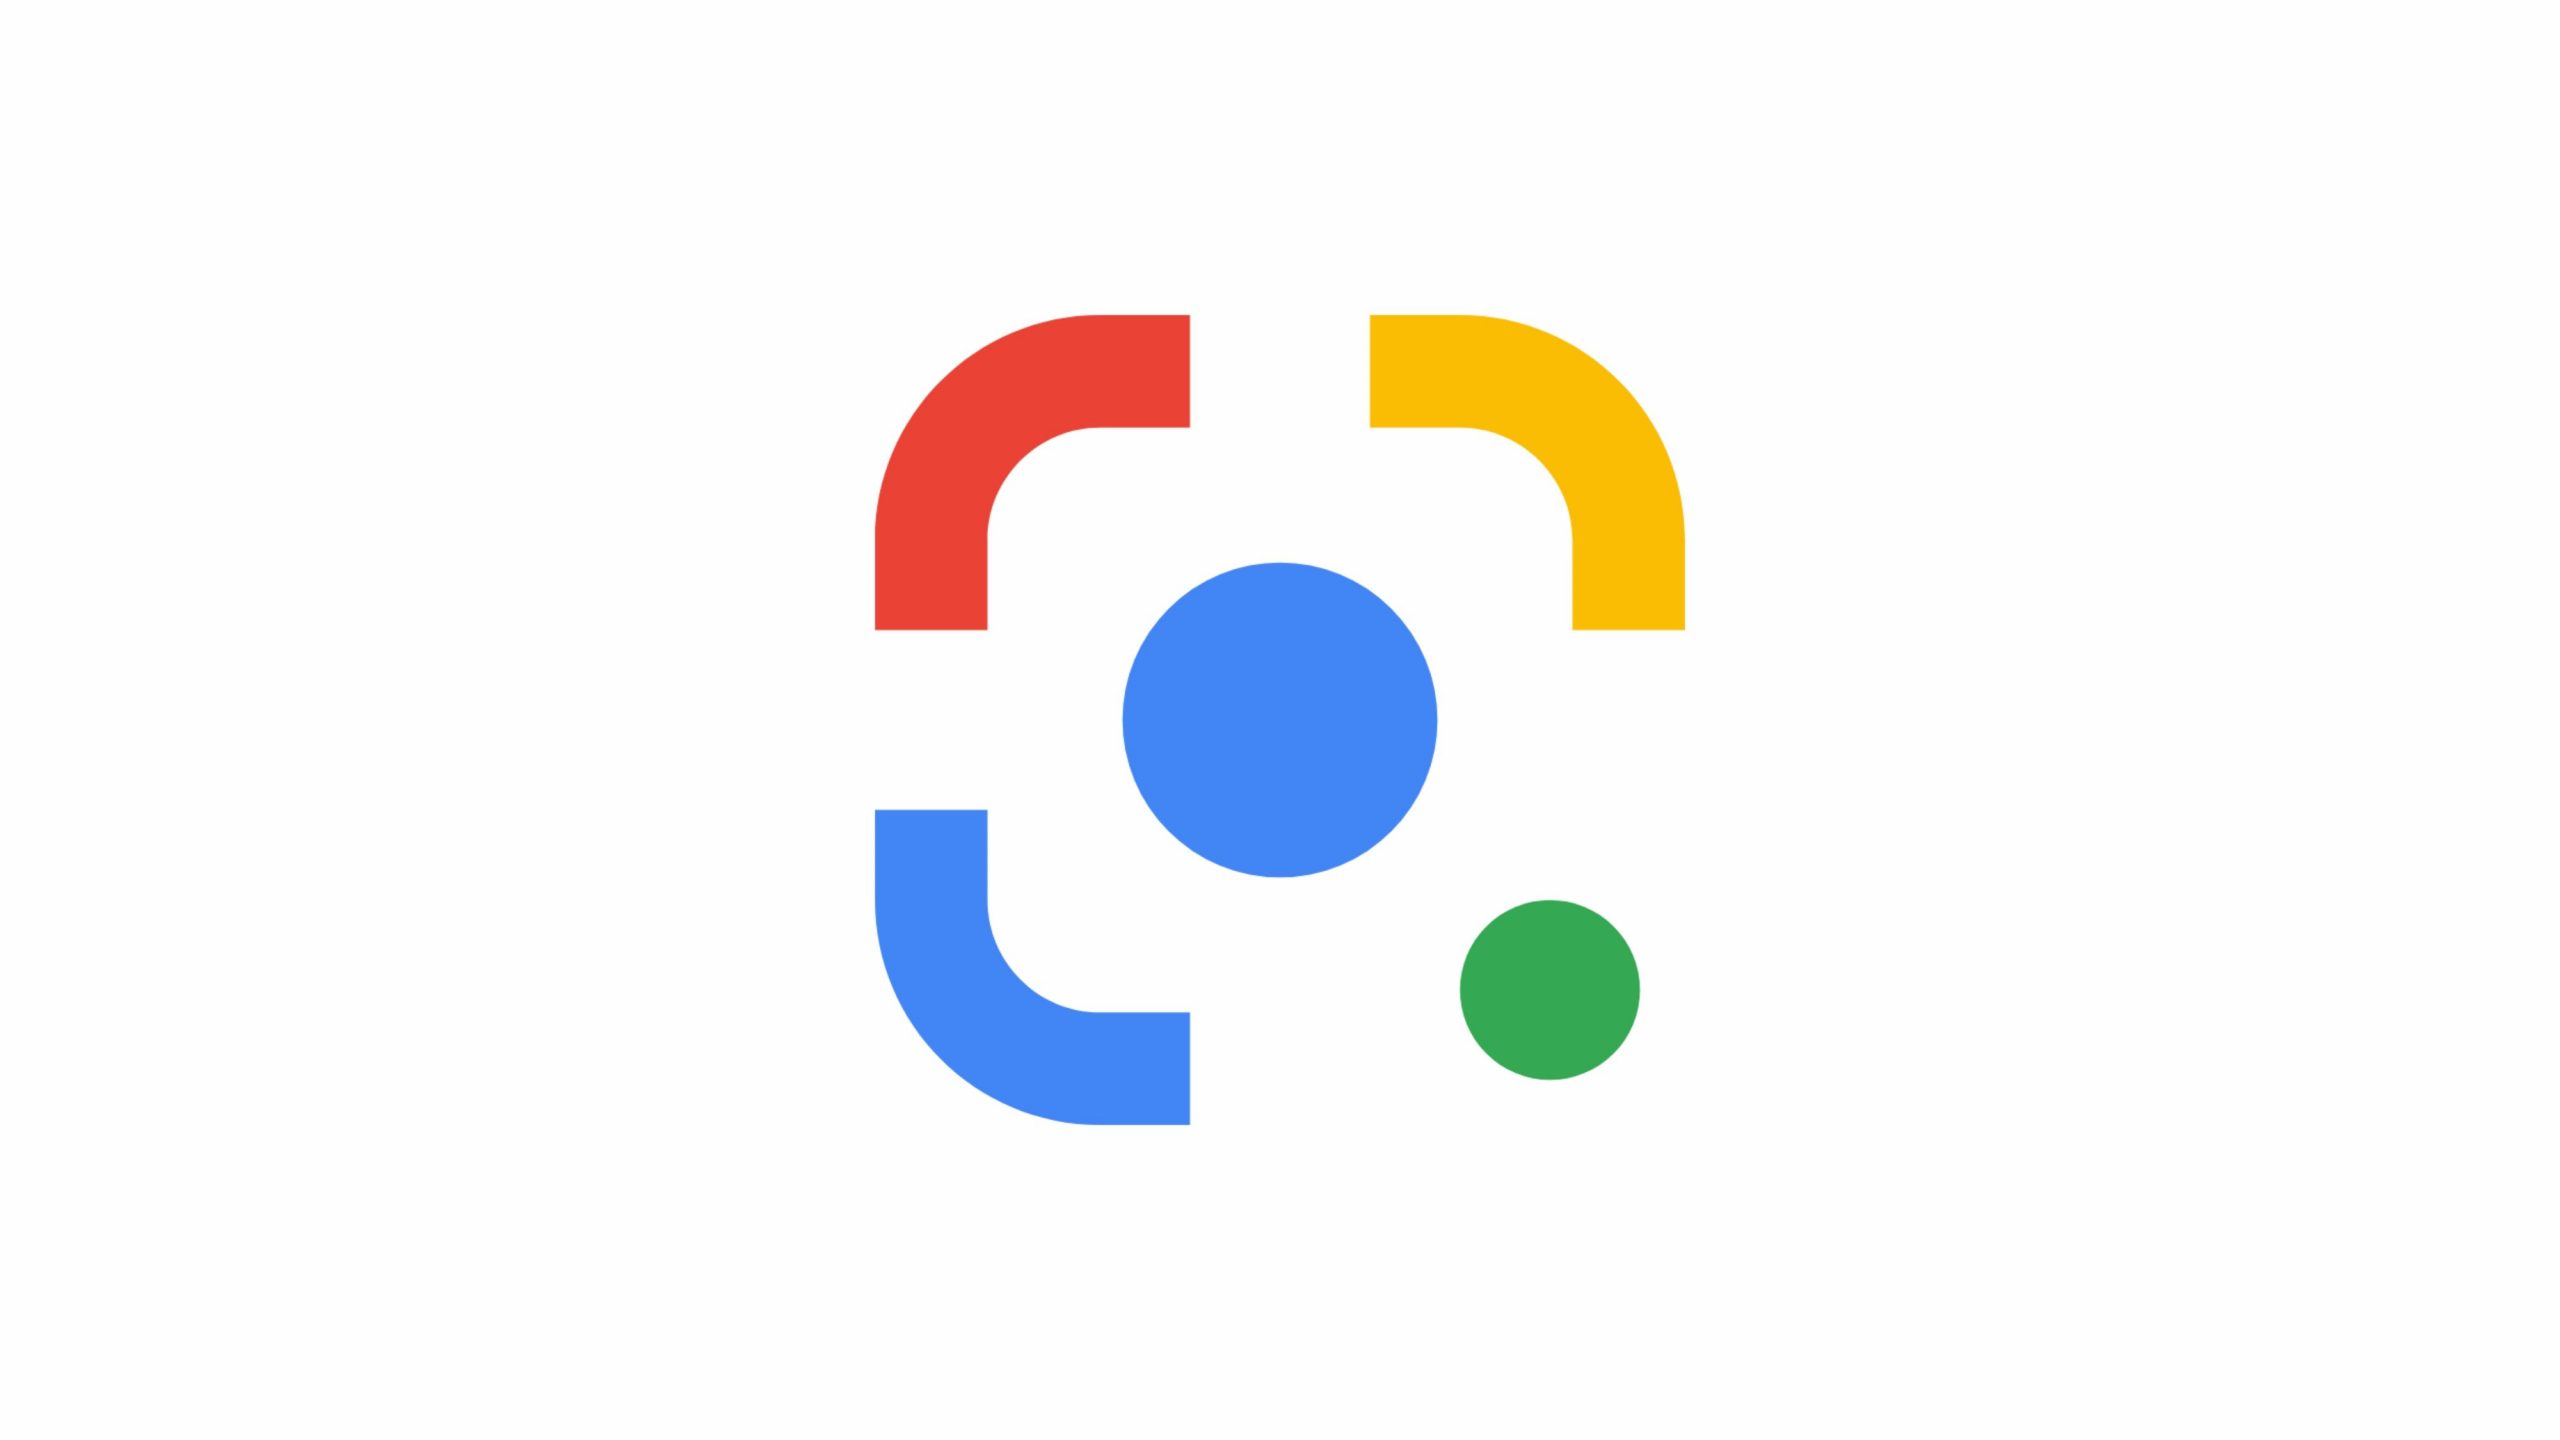 Google Lens reaches over 500 million downloads on the Play Store